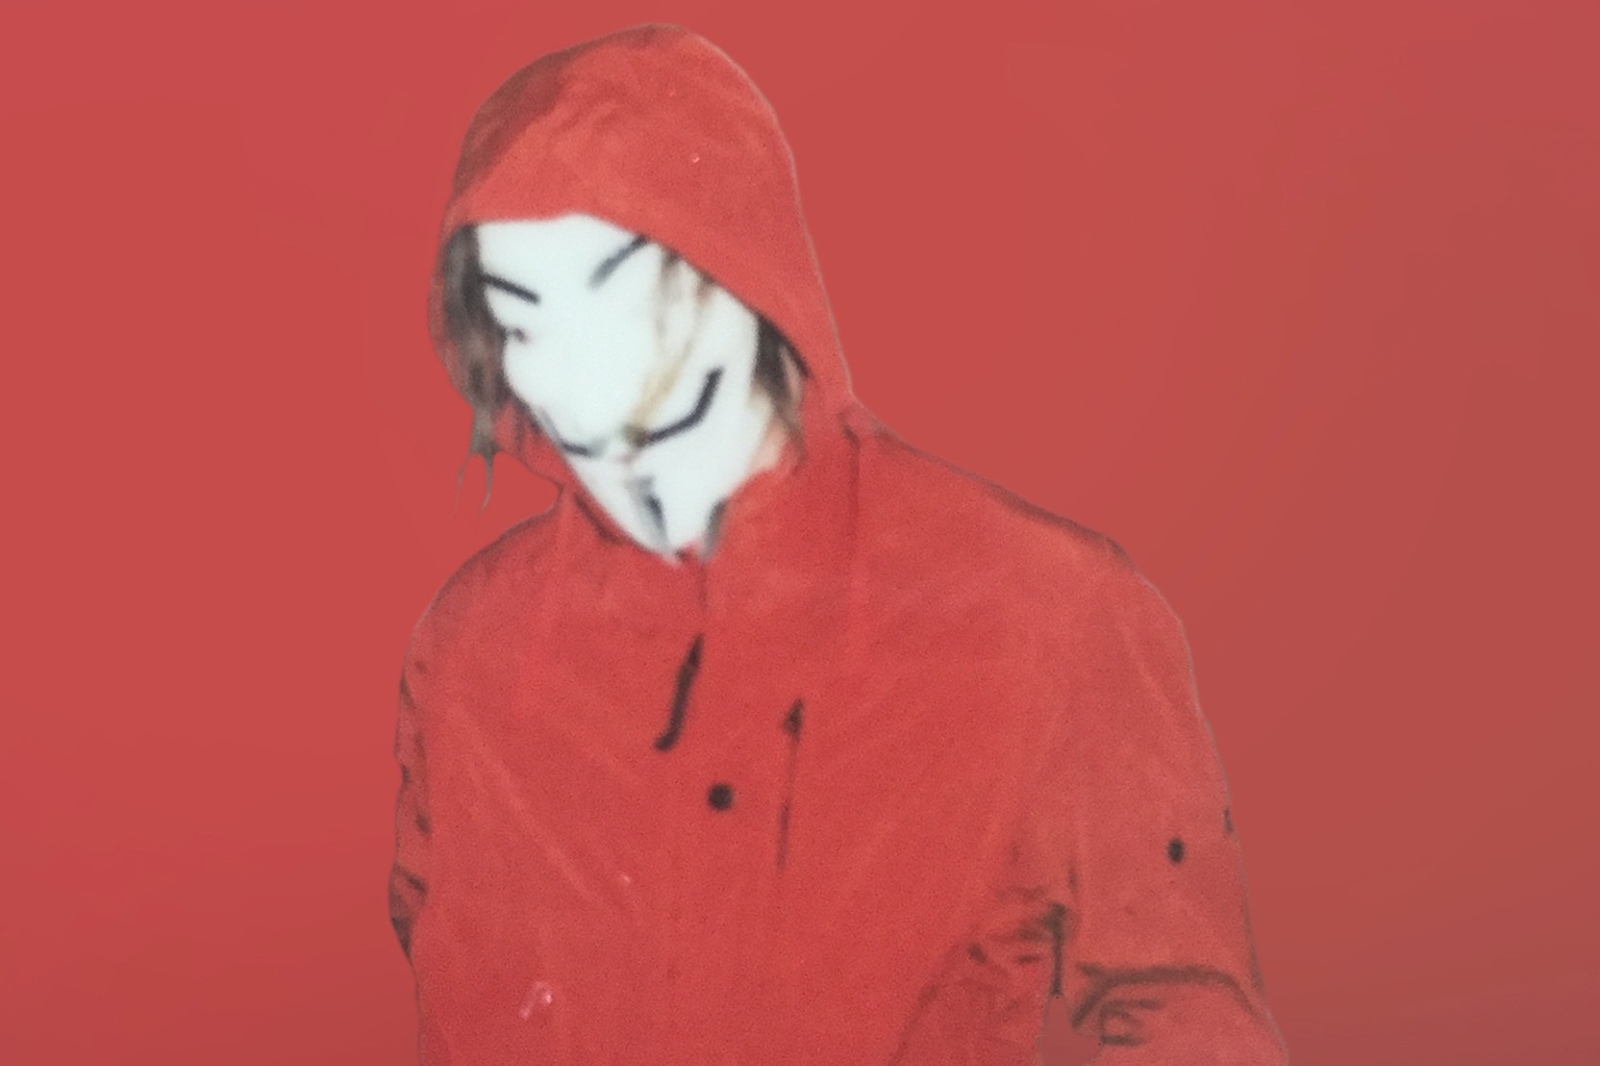 Zomby shares collaborations with Burial and Darkstar